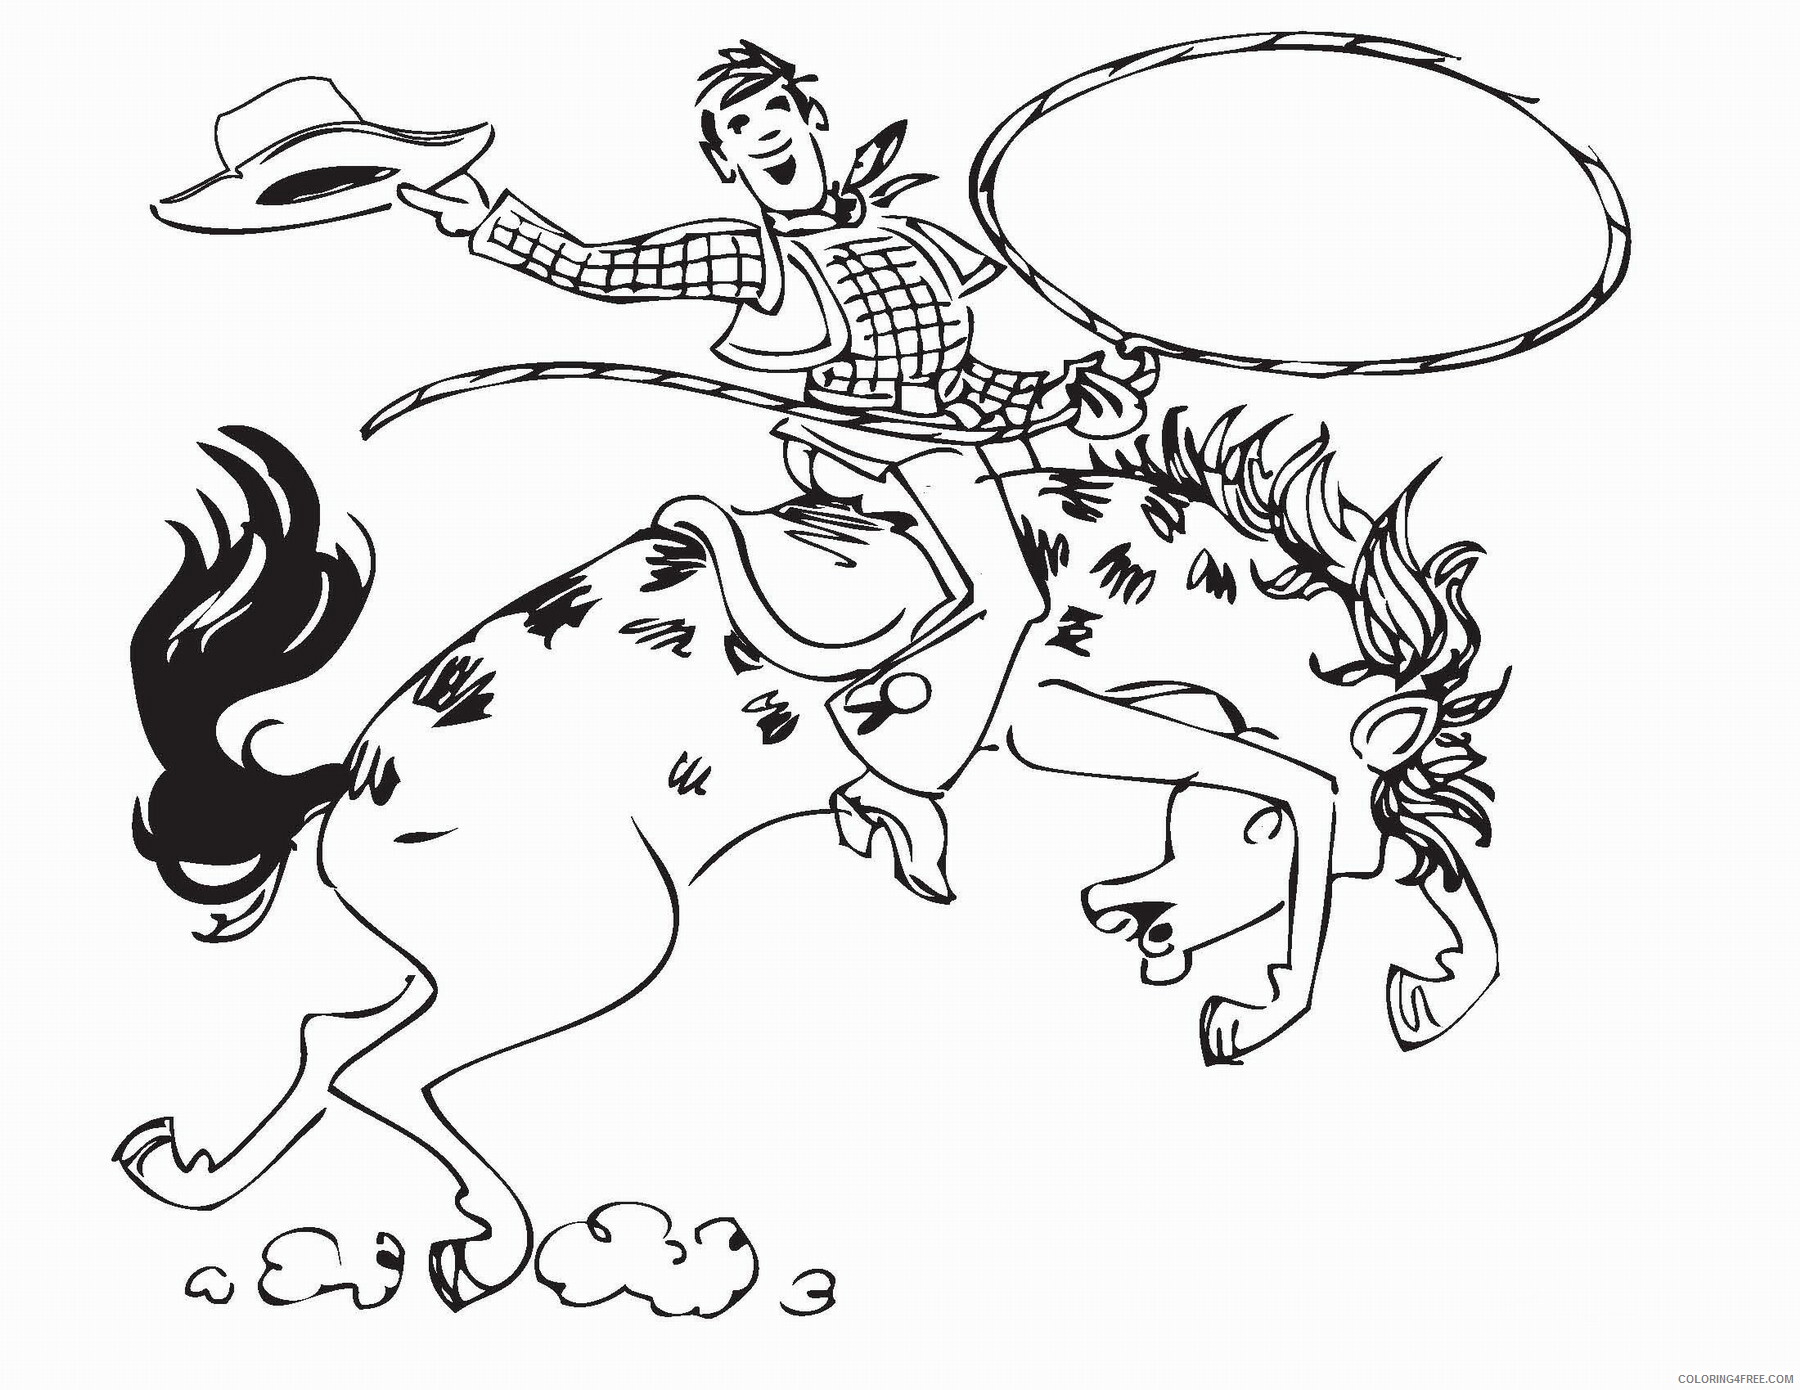 Cowboy Coloring Pages for boys cowboy_16 Printable 2020 0189 Coloring4free